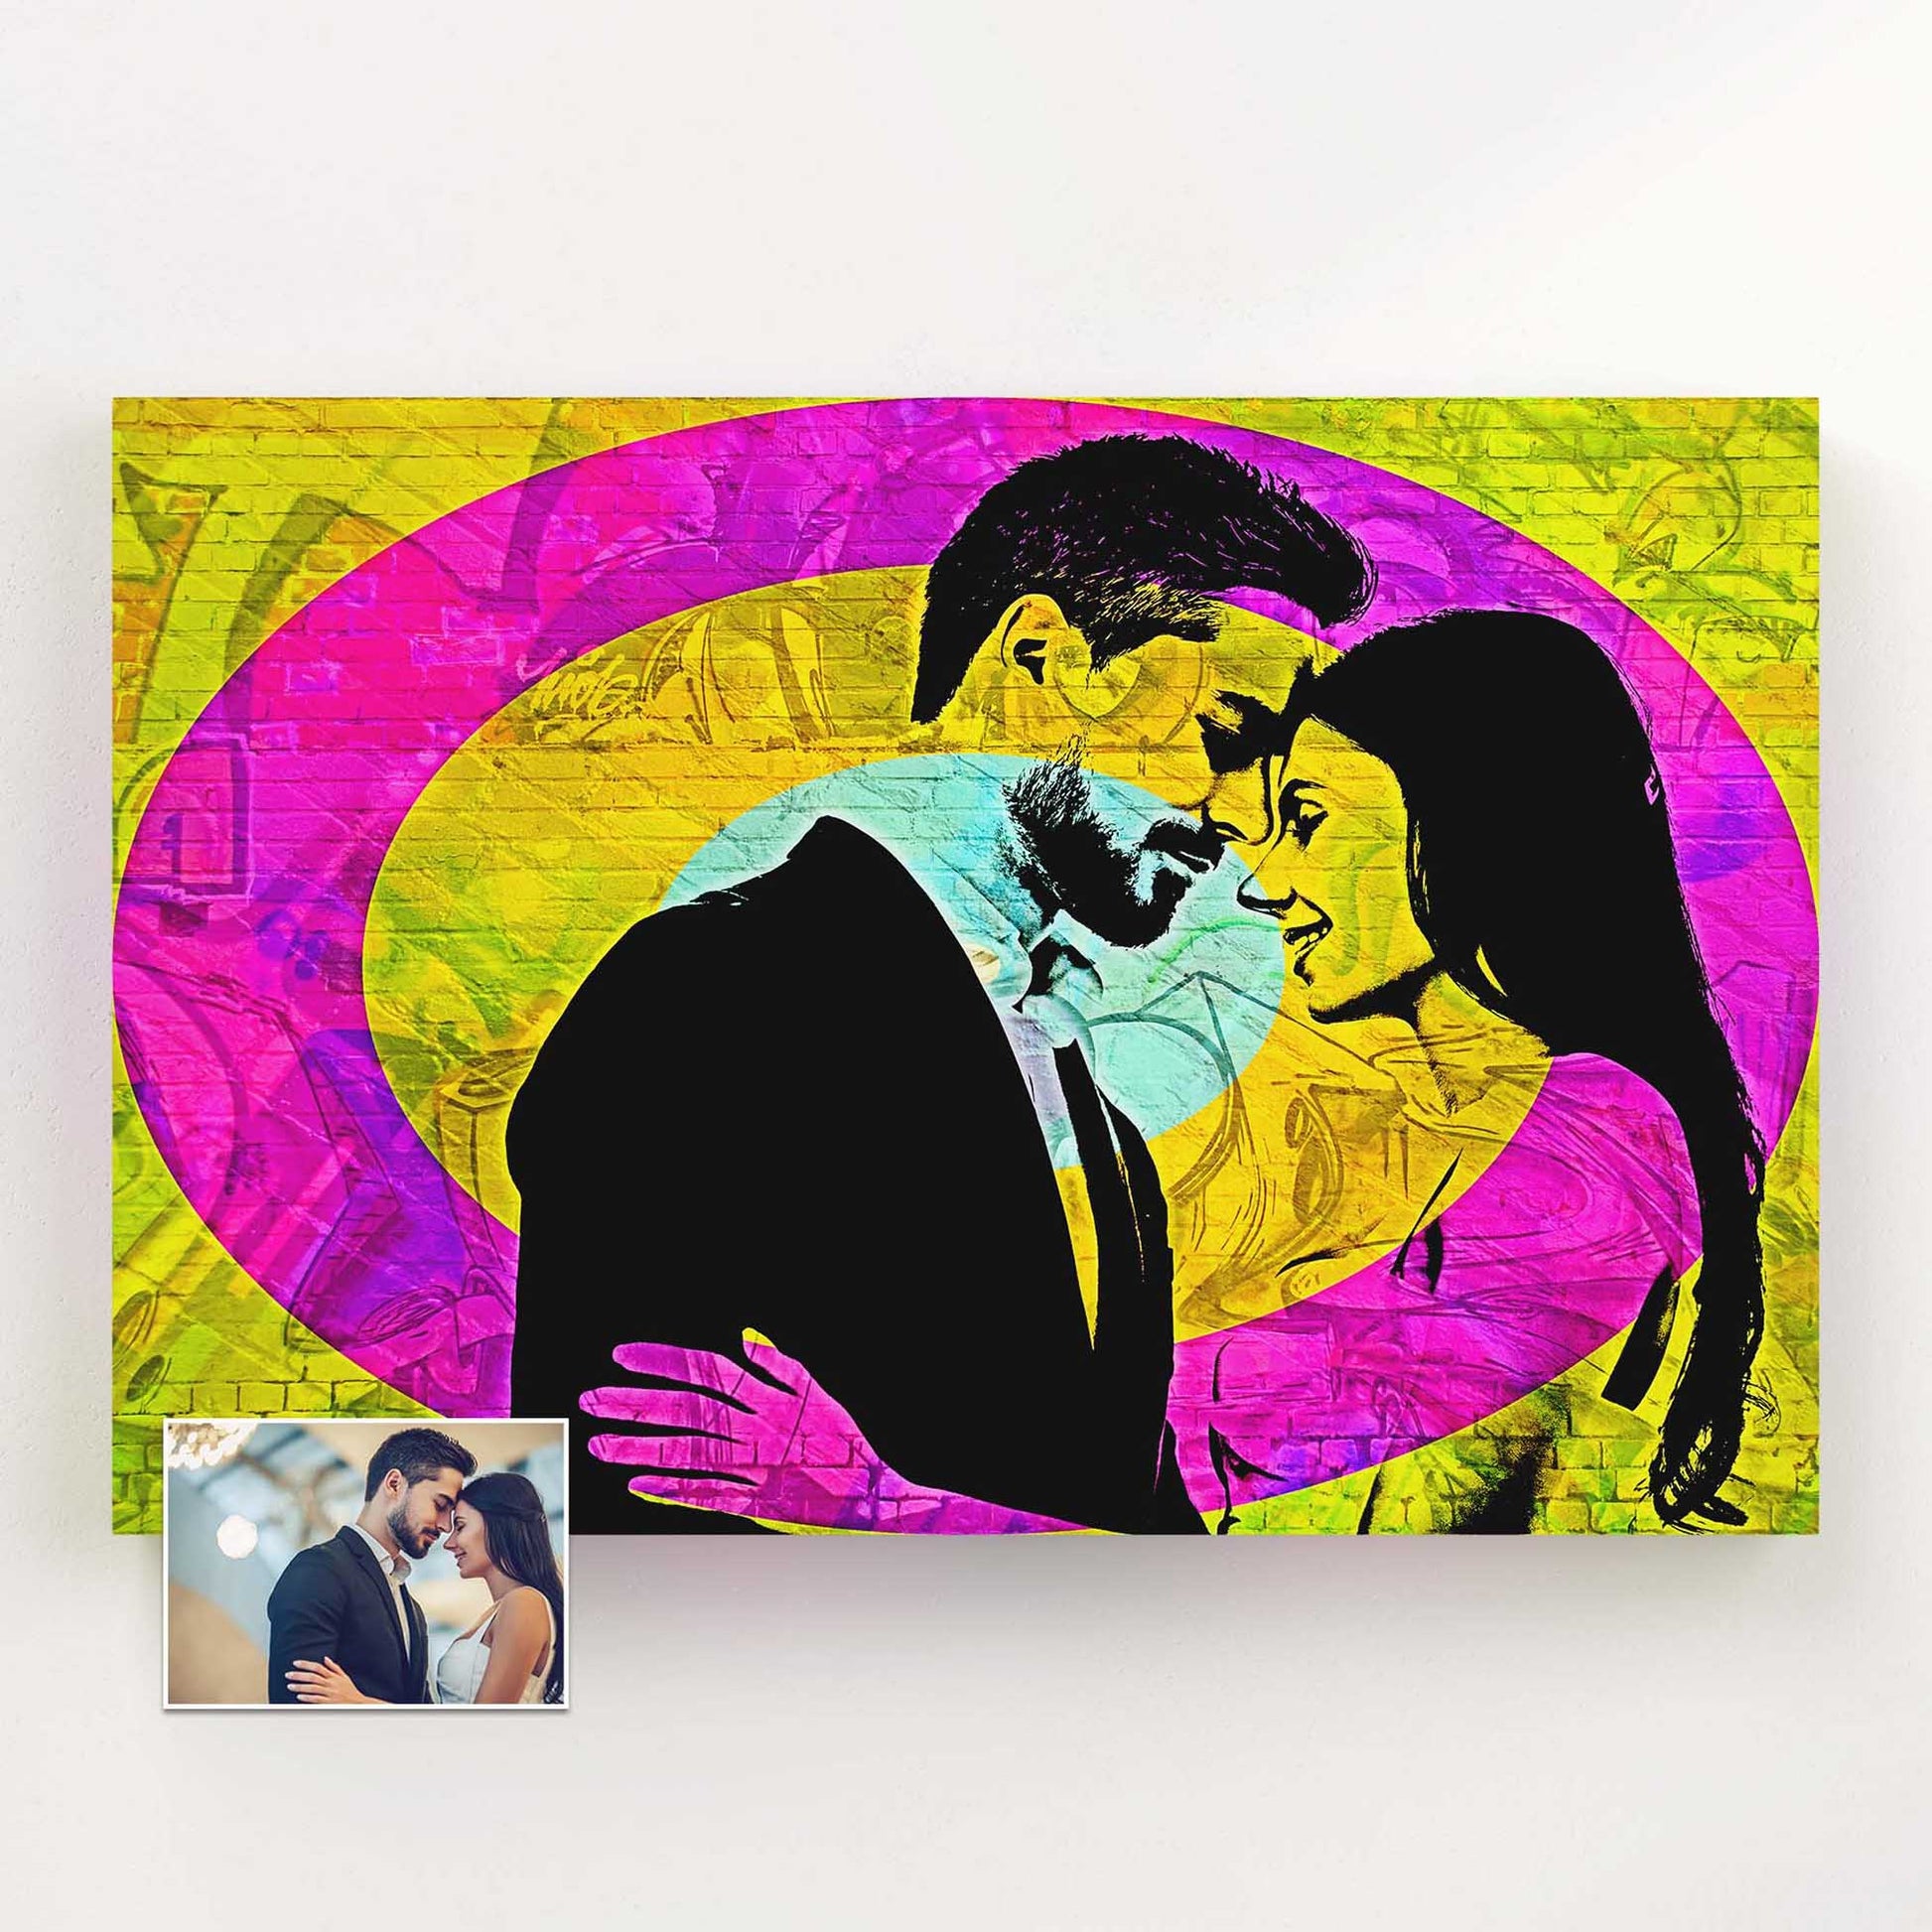 Experience the power of expression with our Personalised Graffiti Street Art Canvas. Its urban, fun, and colorful designs ignite excitement and creativity. Meticulously handmade on woven canvas and printed from your photo